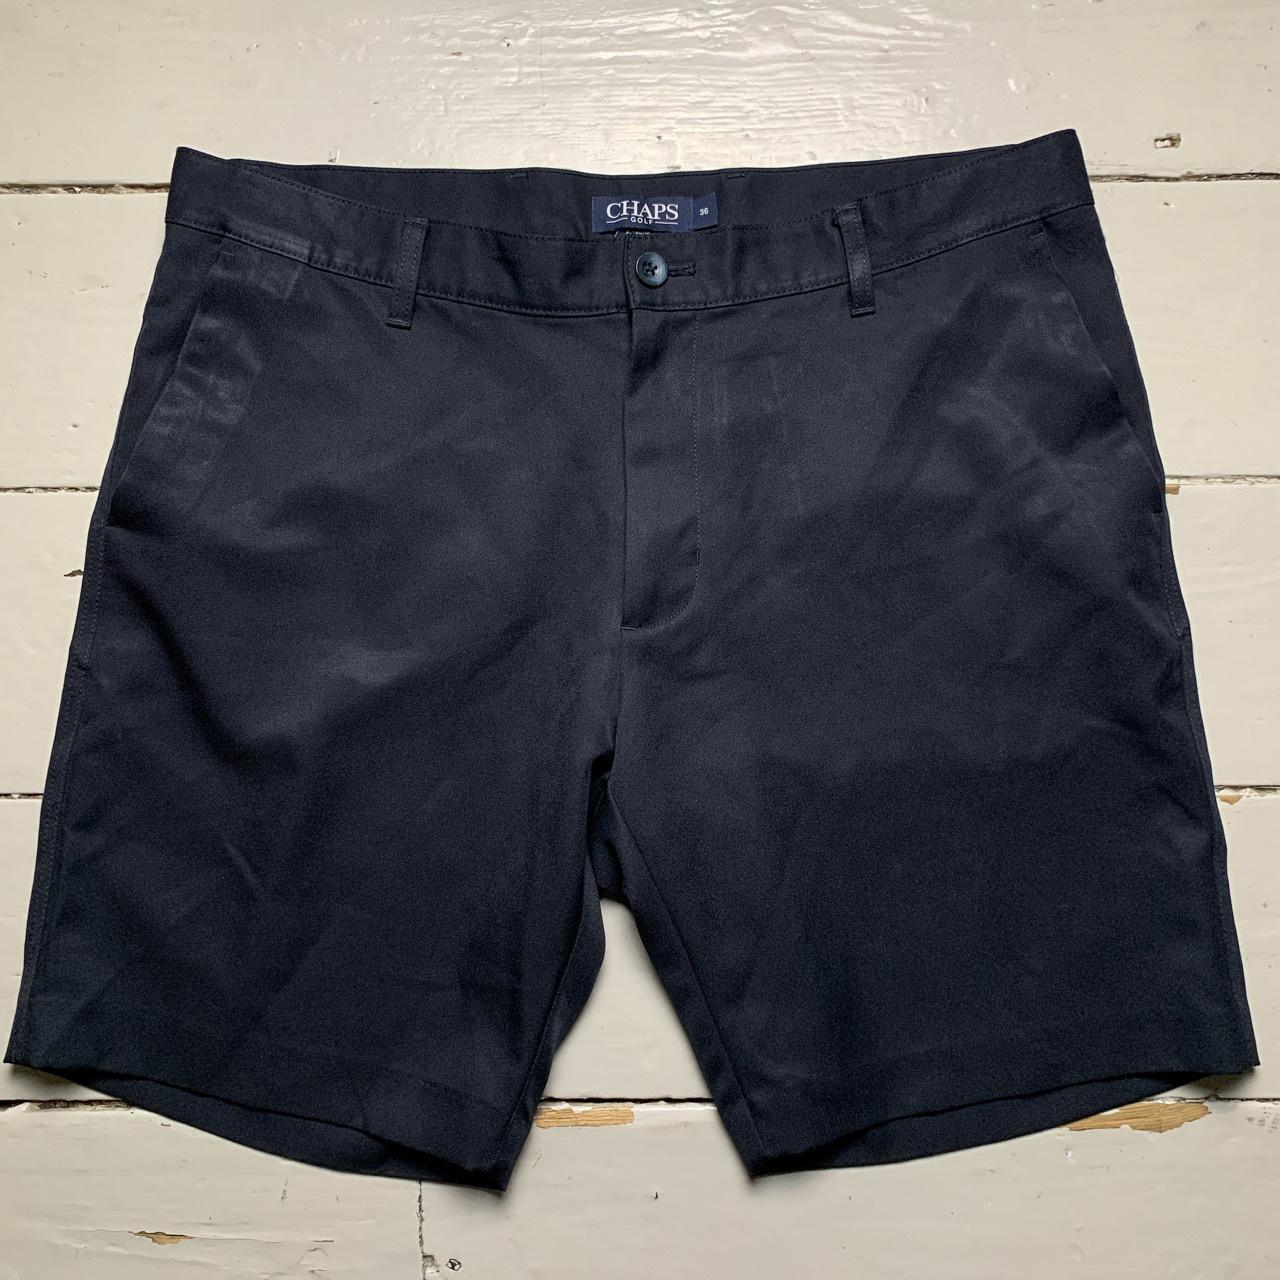 Chaps Vintage Navy Golf Shorts Navy and White